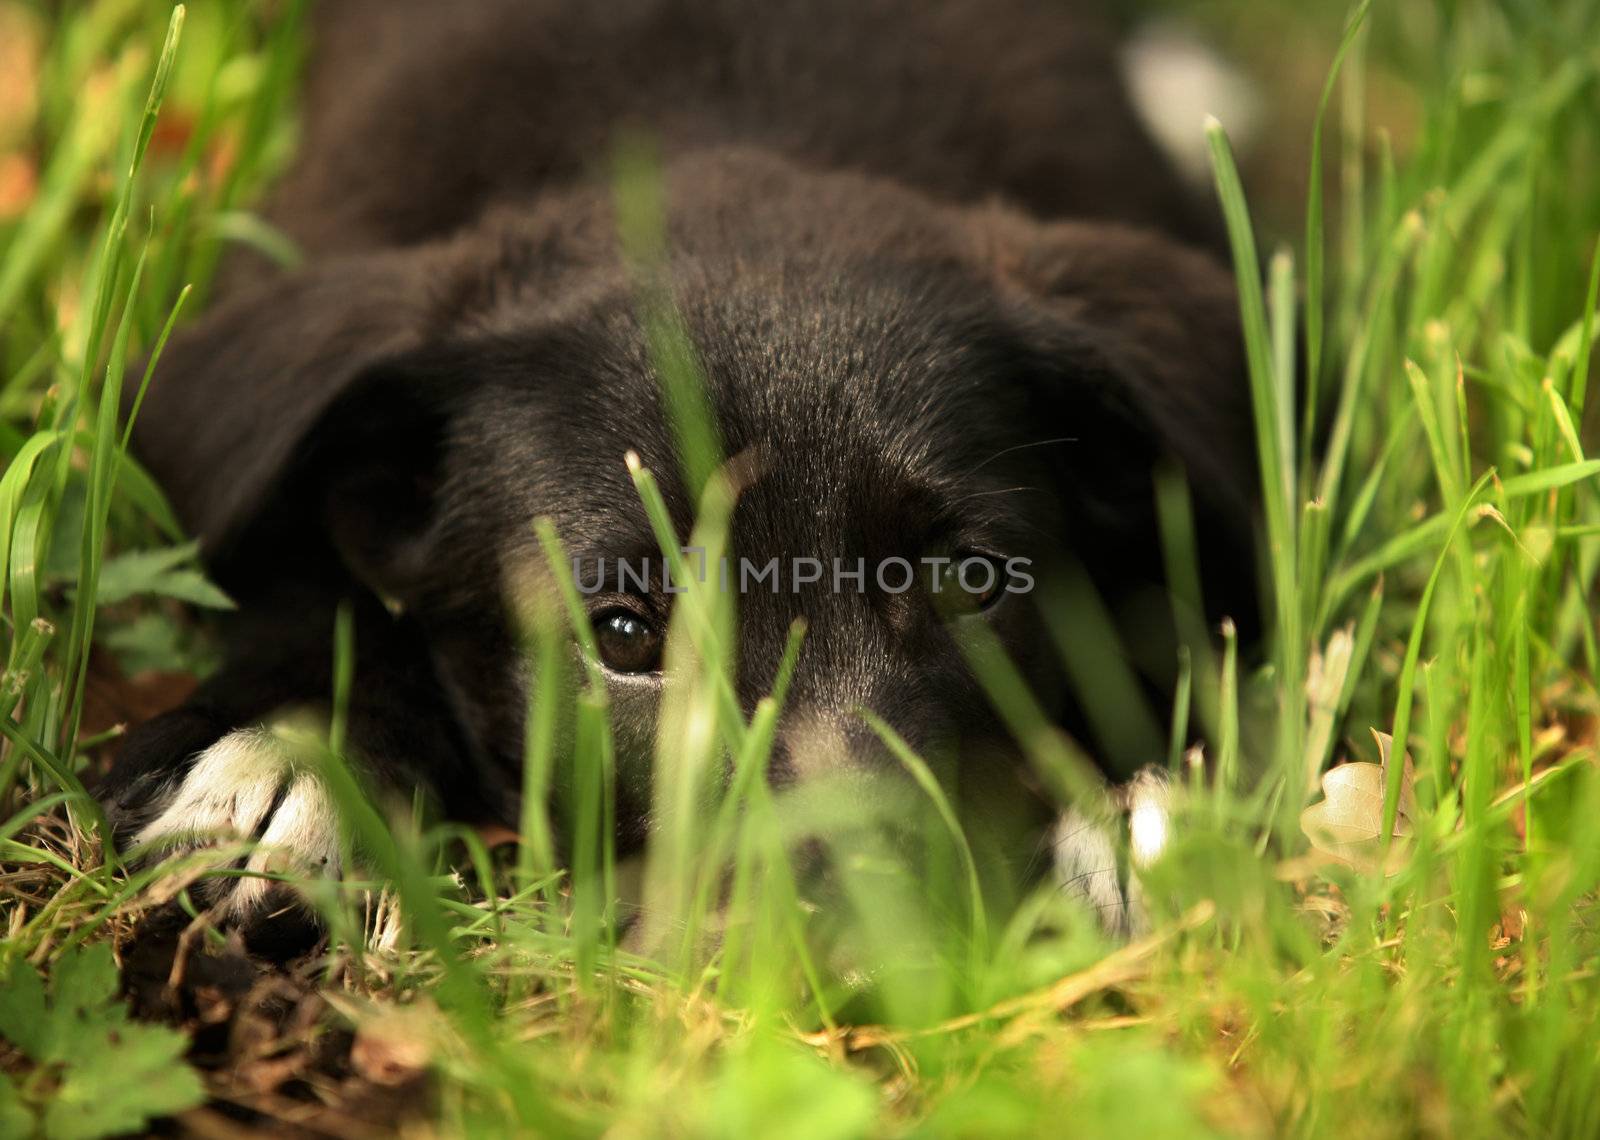 The sad small dog lays in a grass